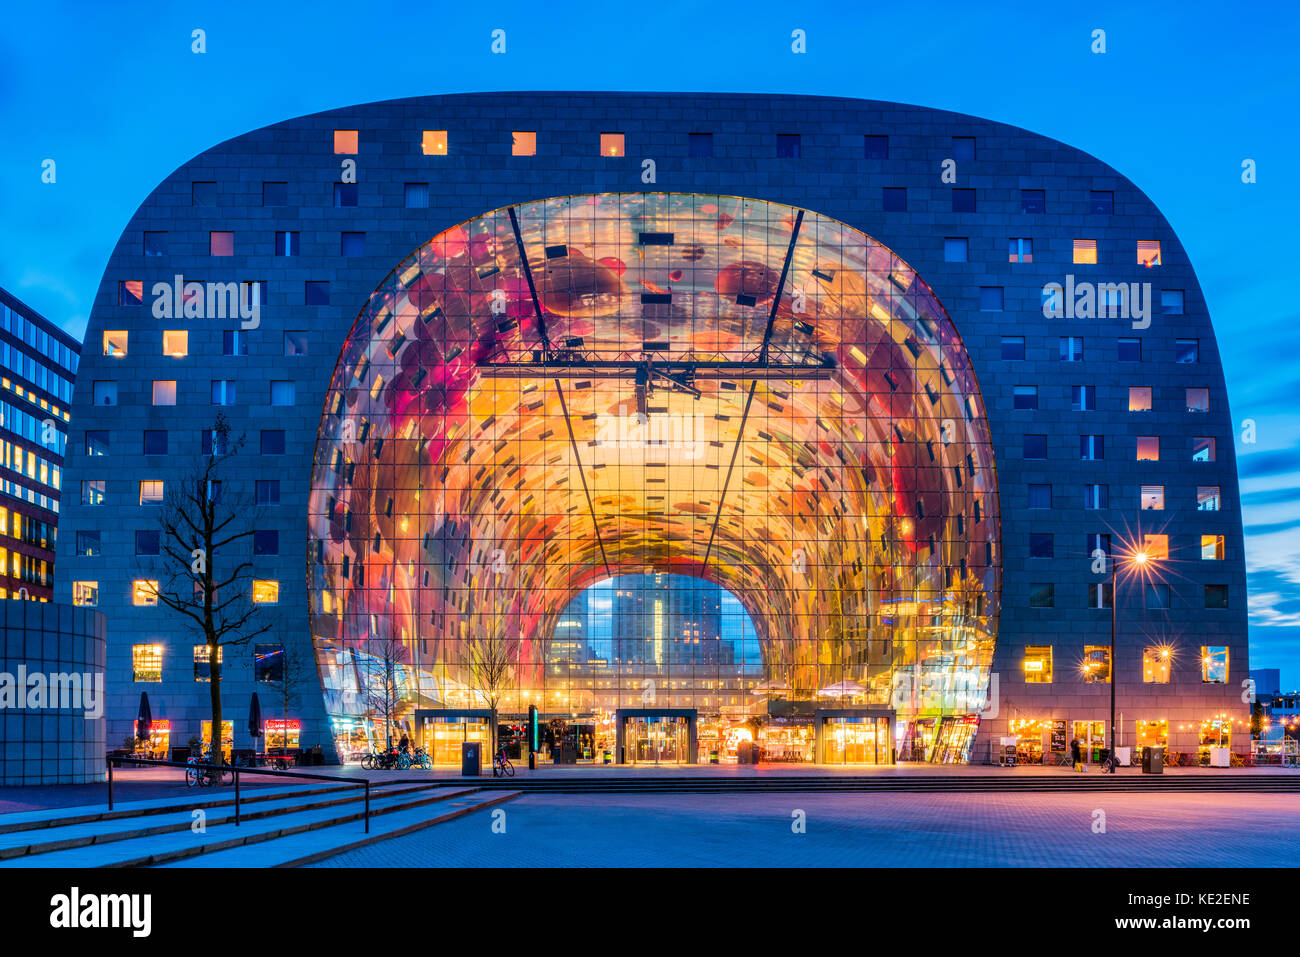 Market Hall in the Blaak district of Rotterdam, Netherlands at dusk. It is a residential and office building with a market hall underneath. Stock Photo